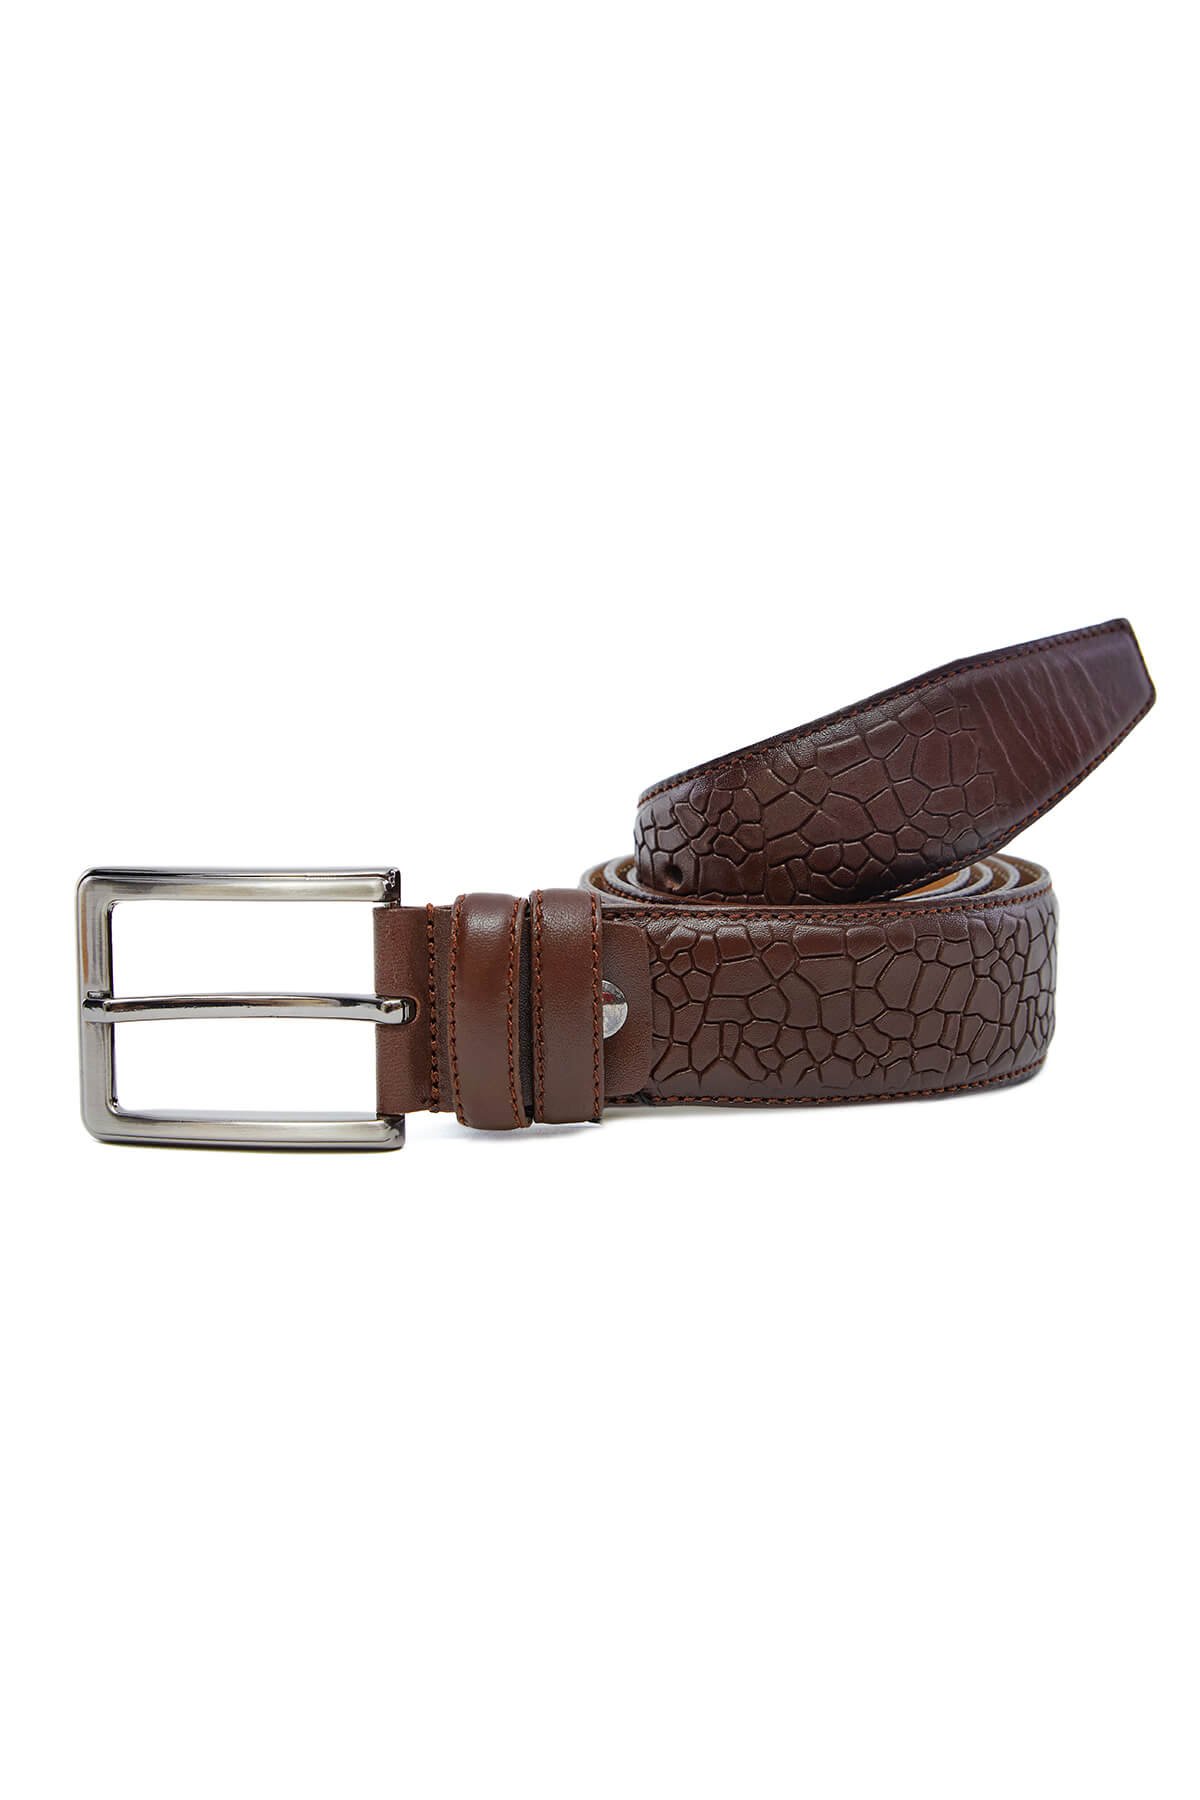 Patterned Genuine Classic Leather Belt Brown